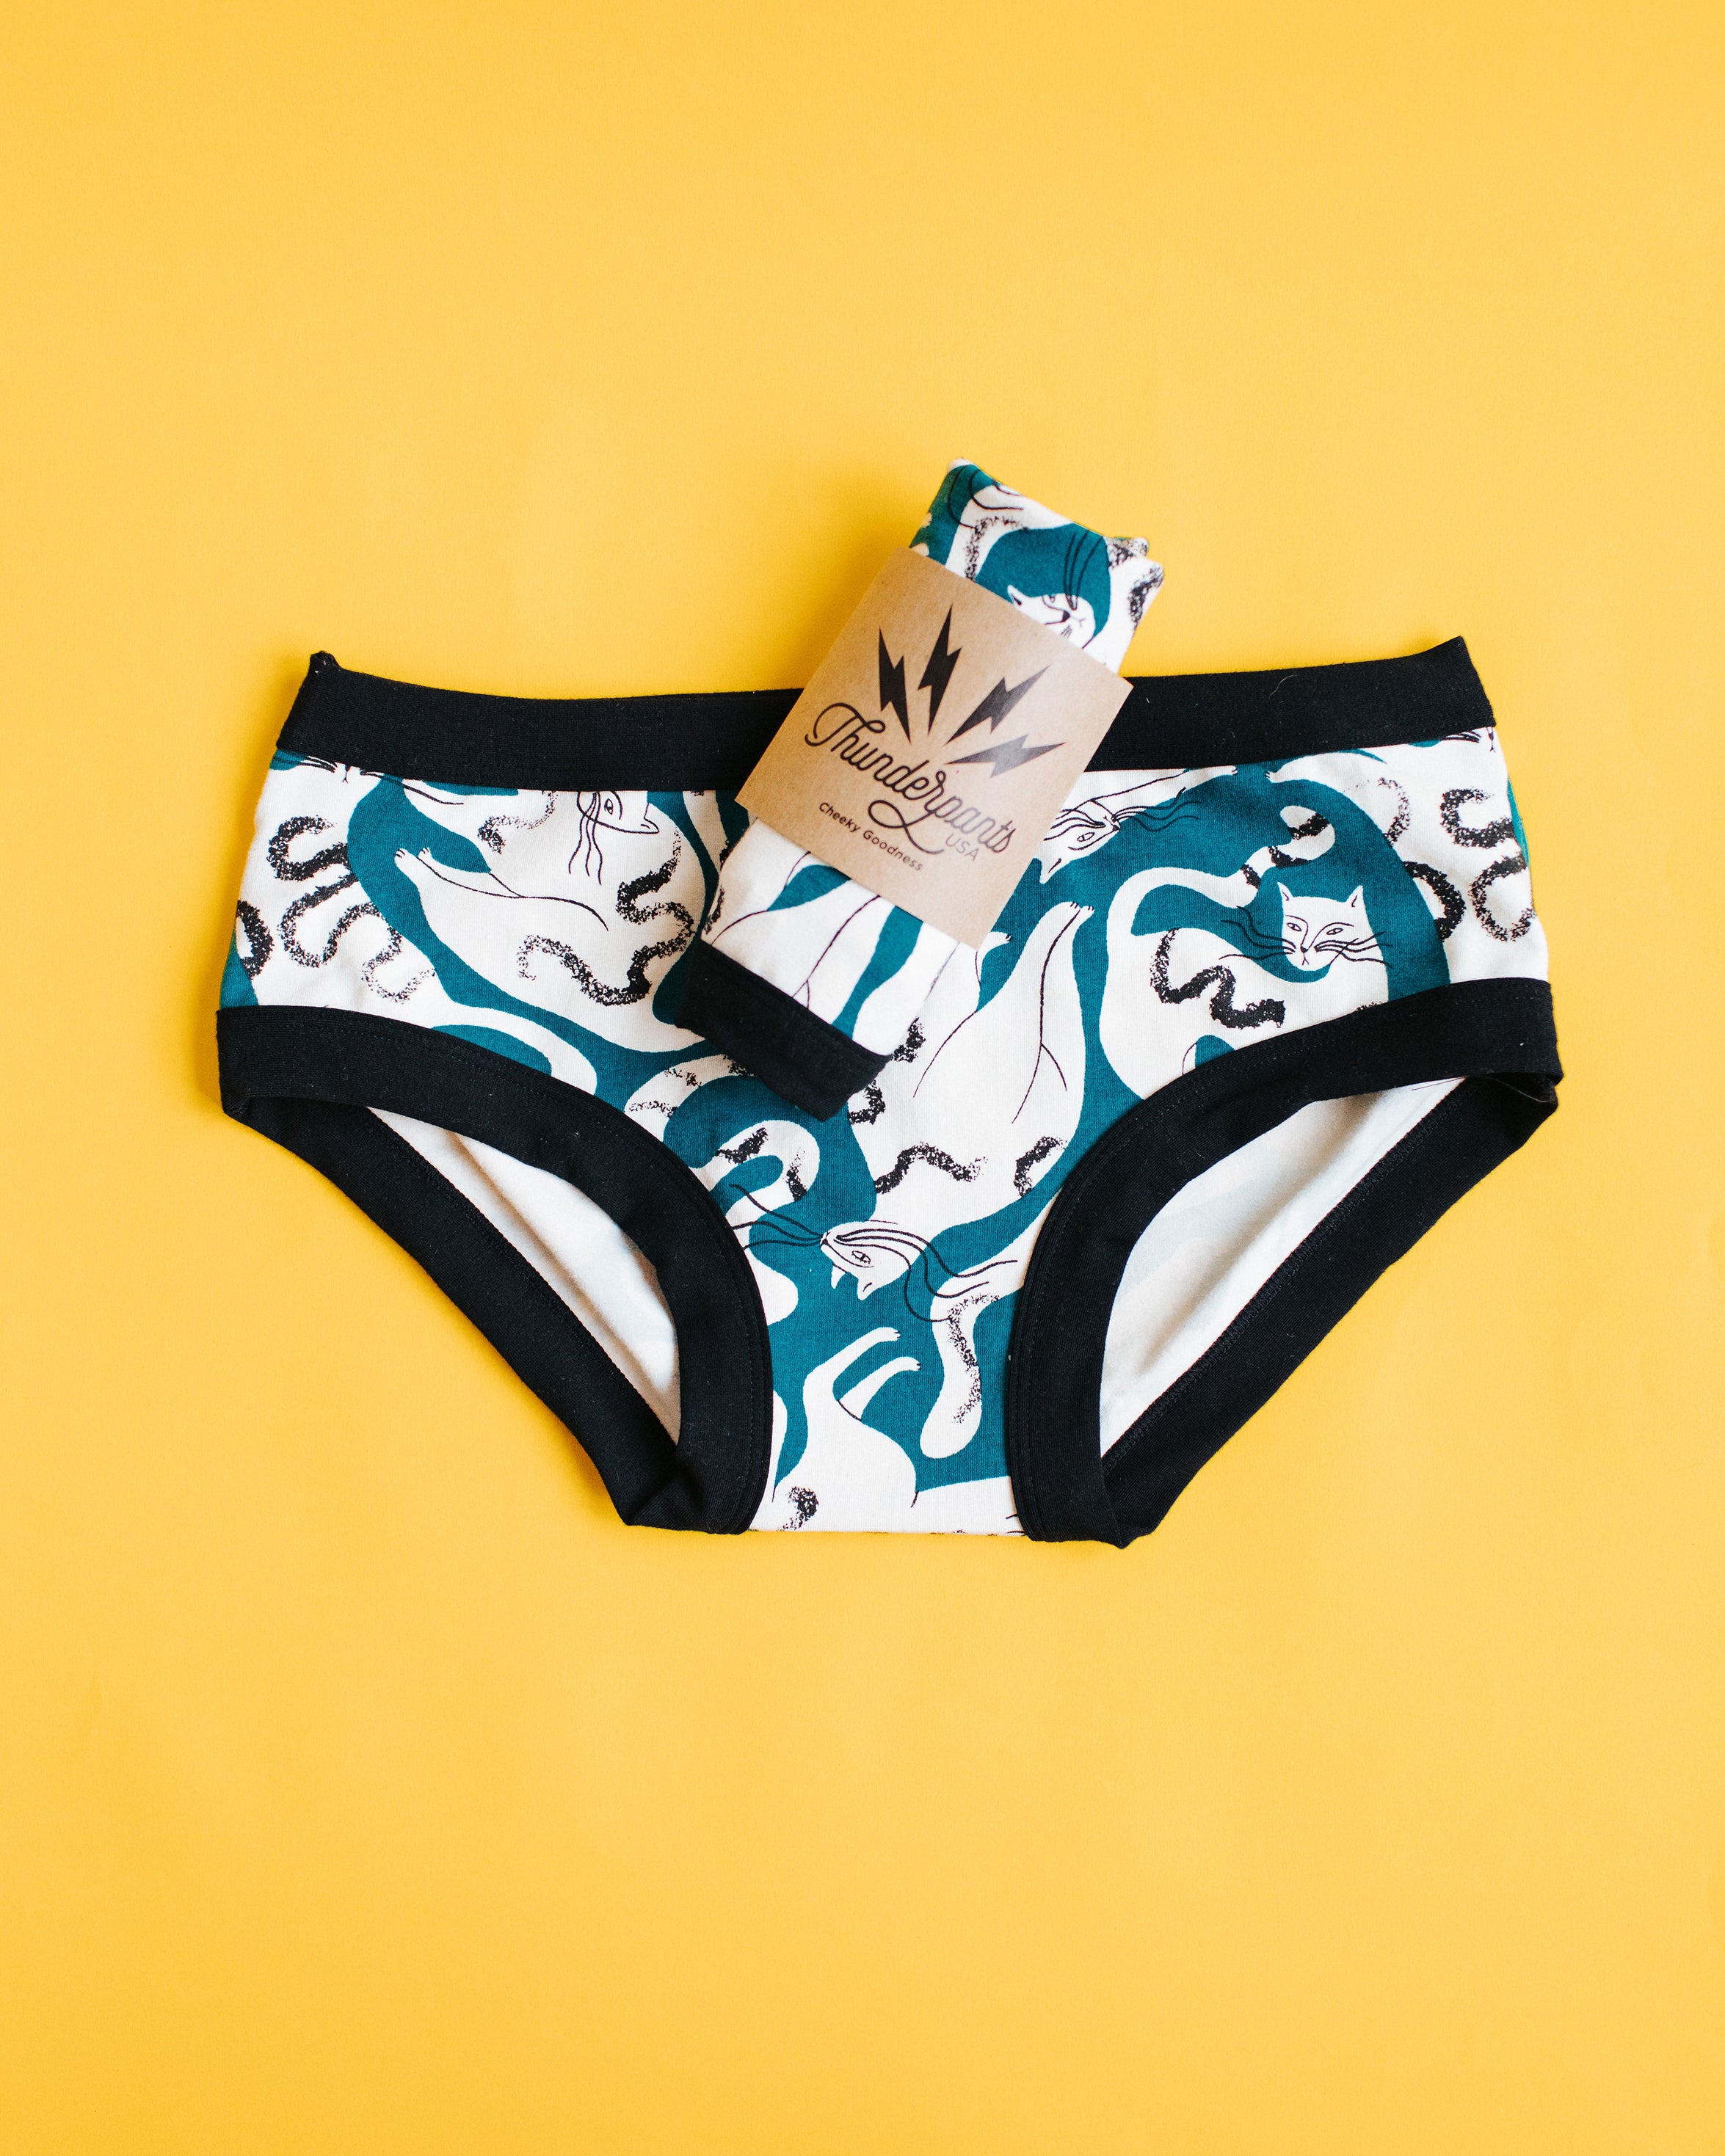 Flat lay of Thunderpants Hipster style underwear and a packaged pair in Hey Meow! print - green with white cats.